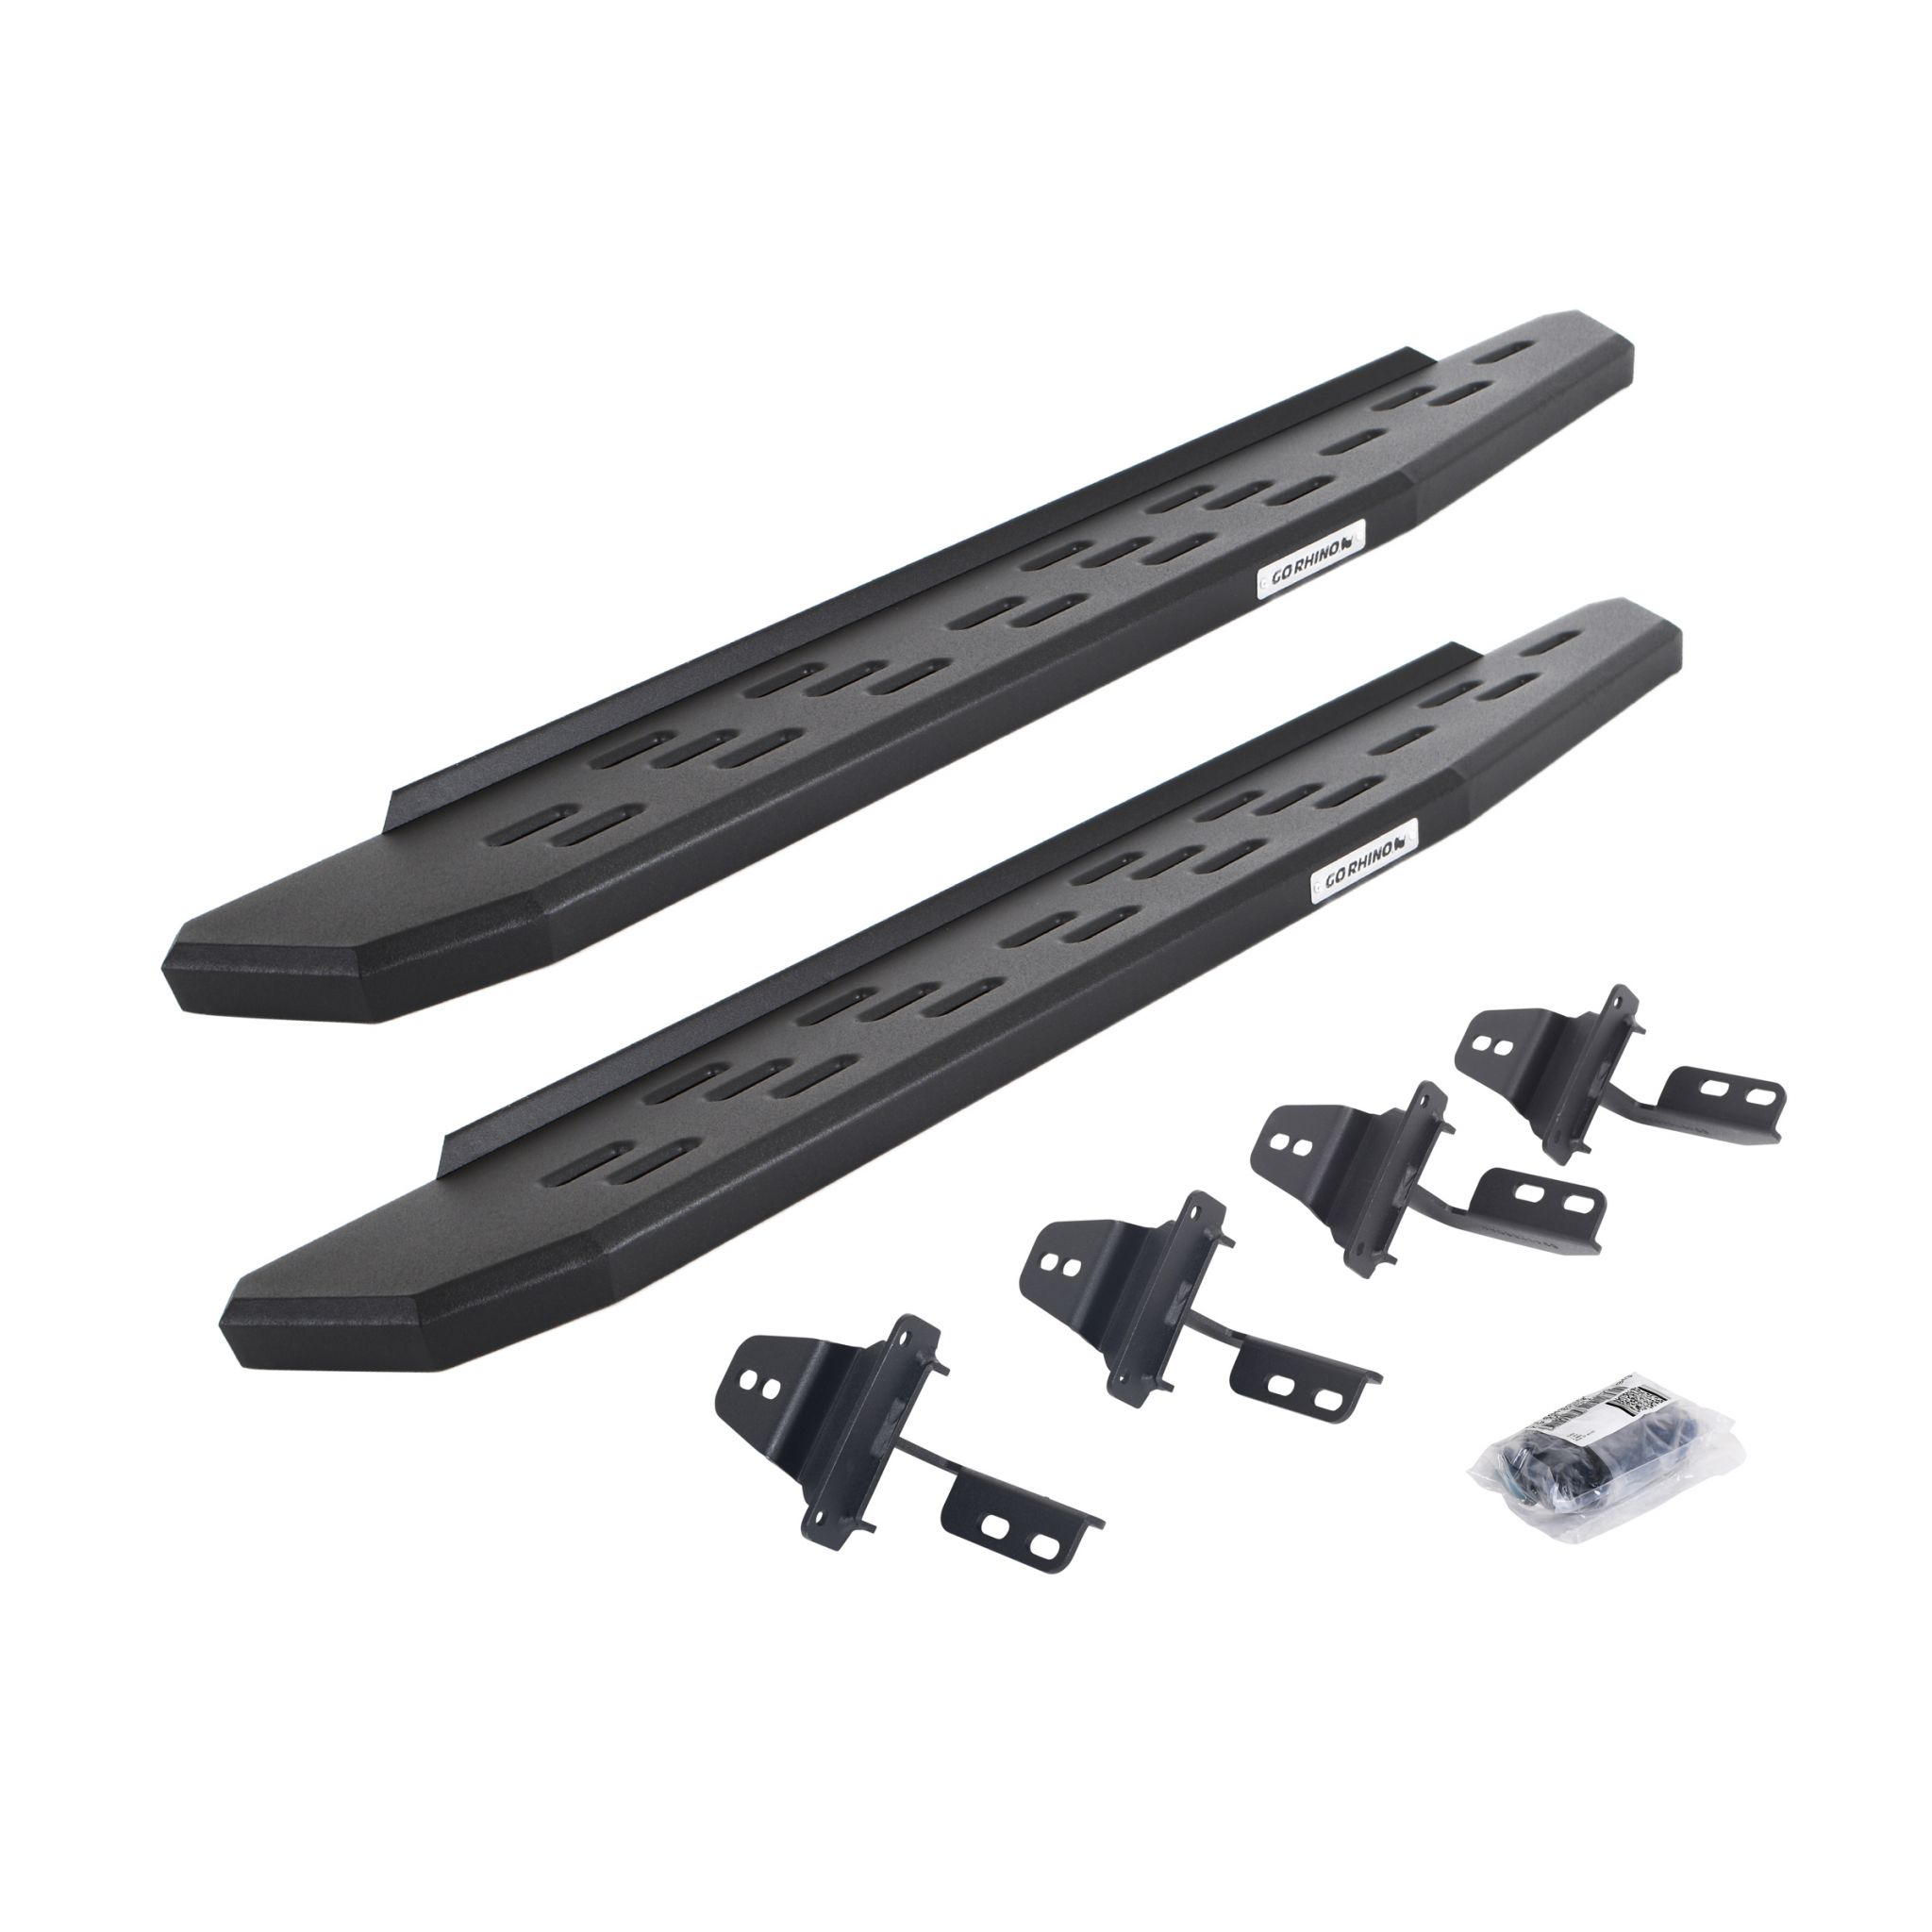 Go Rhino 69692648PC - RB30 Running Boards with Mounting Bracket Kit - Textured Black